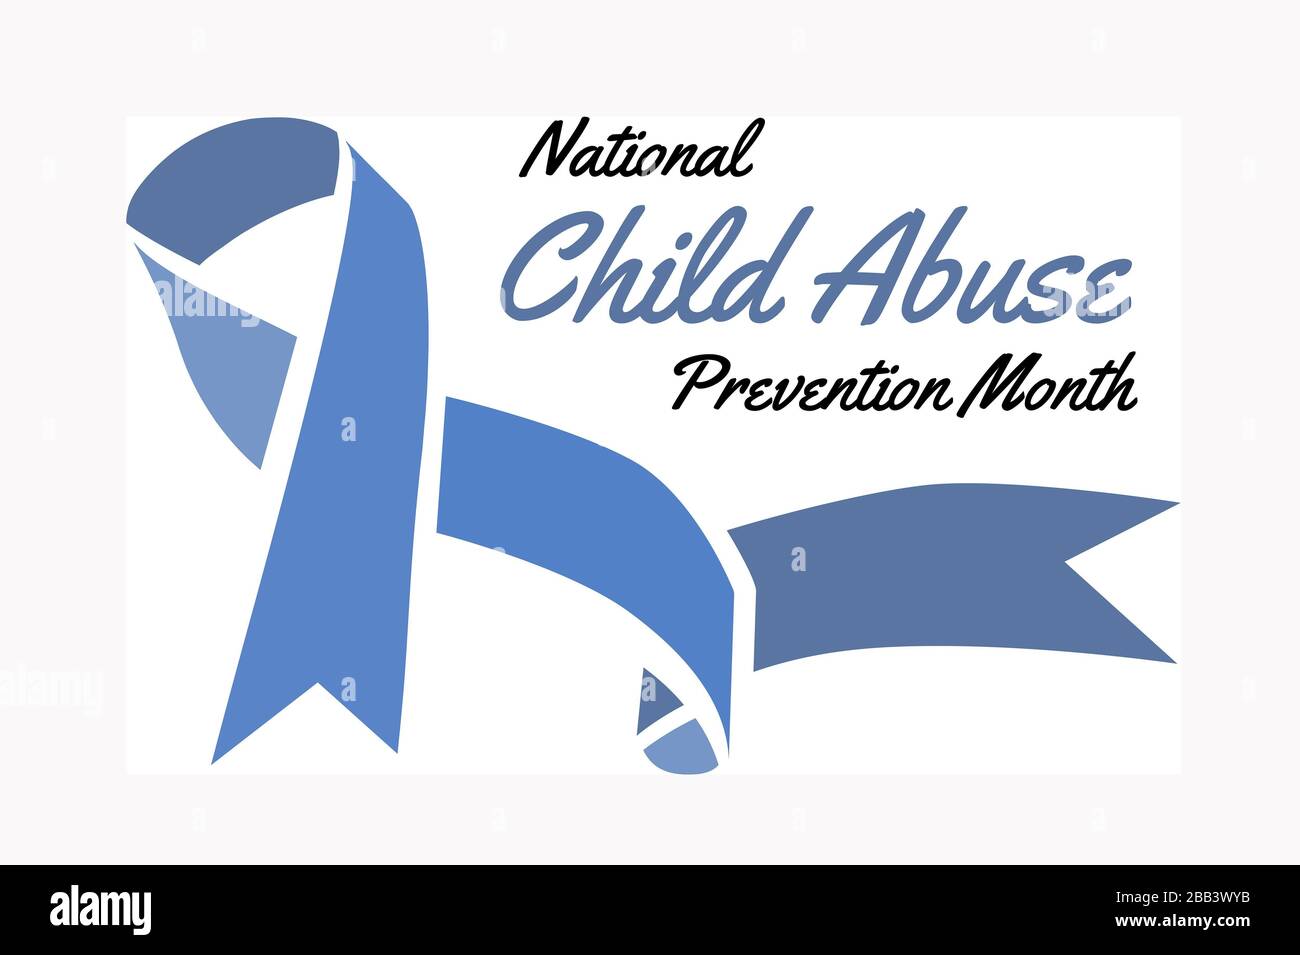 National Child Abuse Prevention Month. Vector illustration with blue ribbon on white. Stock Photo